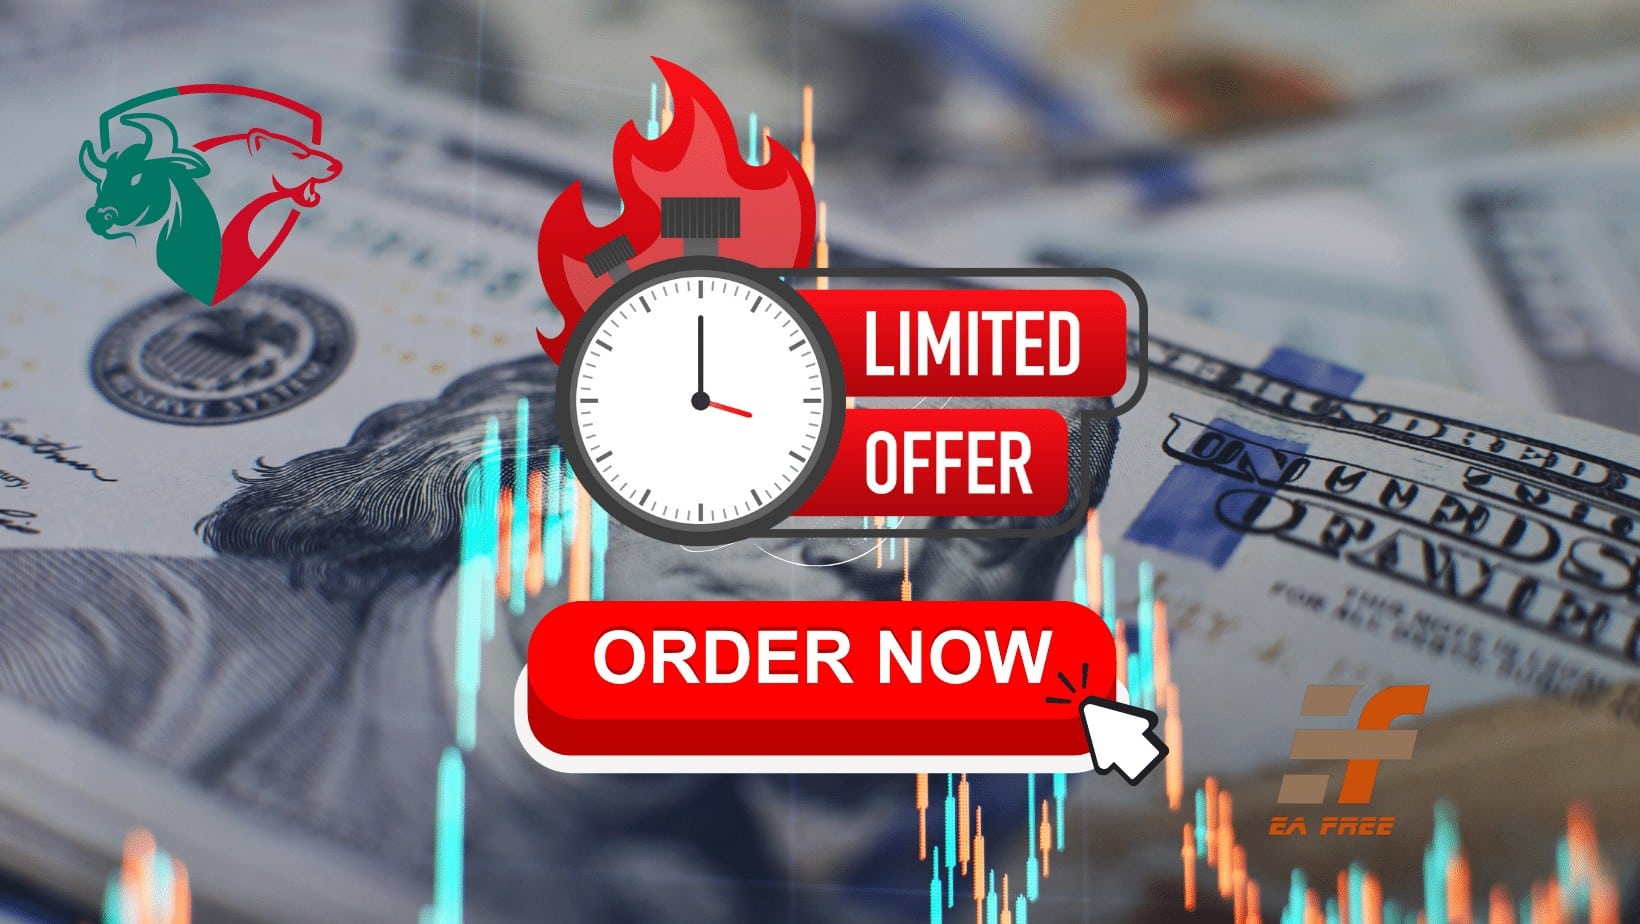 Market Order, Pending Order? How to Place Buy and Sell Orders in Forex Latest 2023 - Market Order